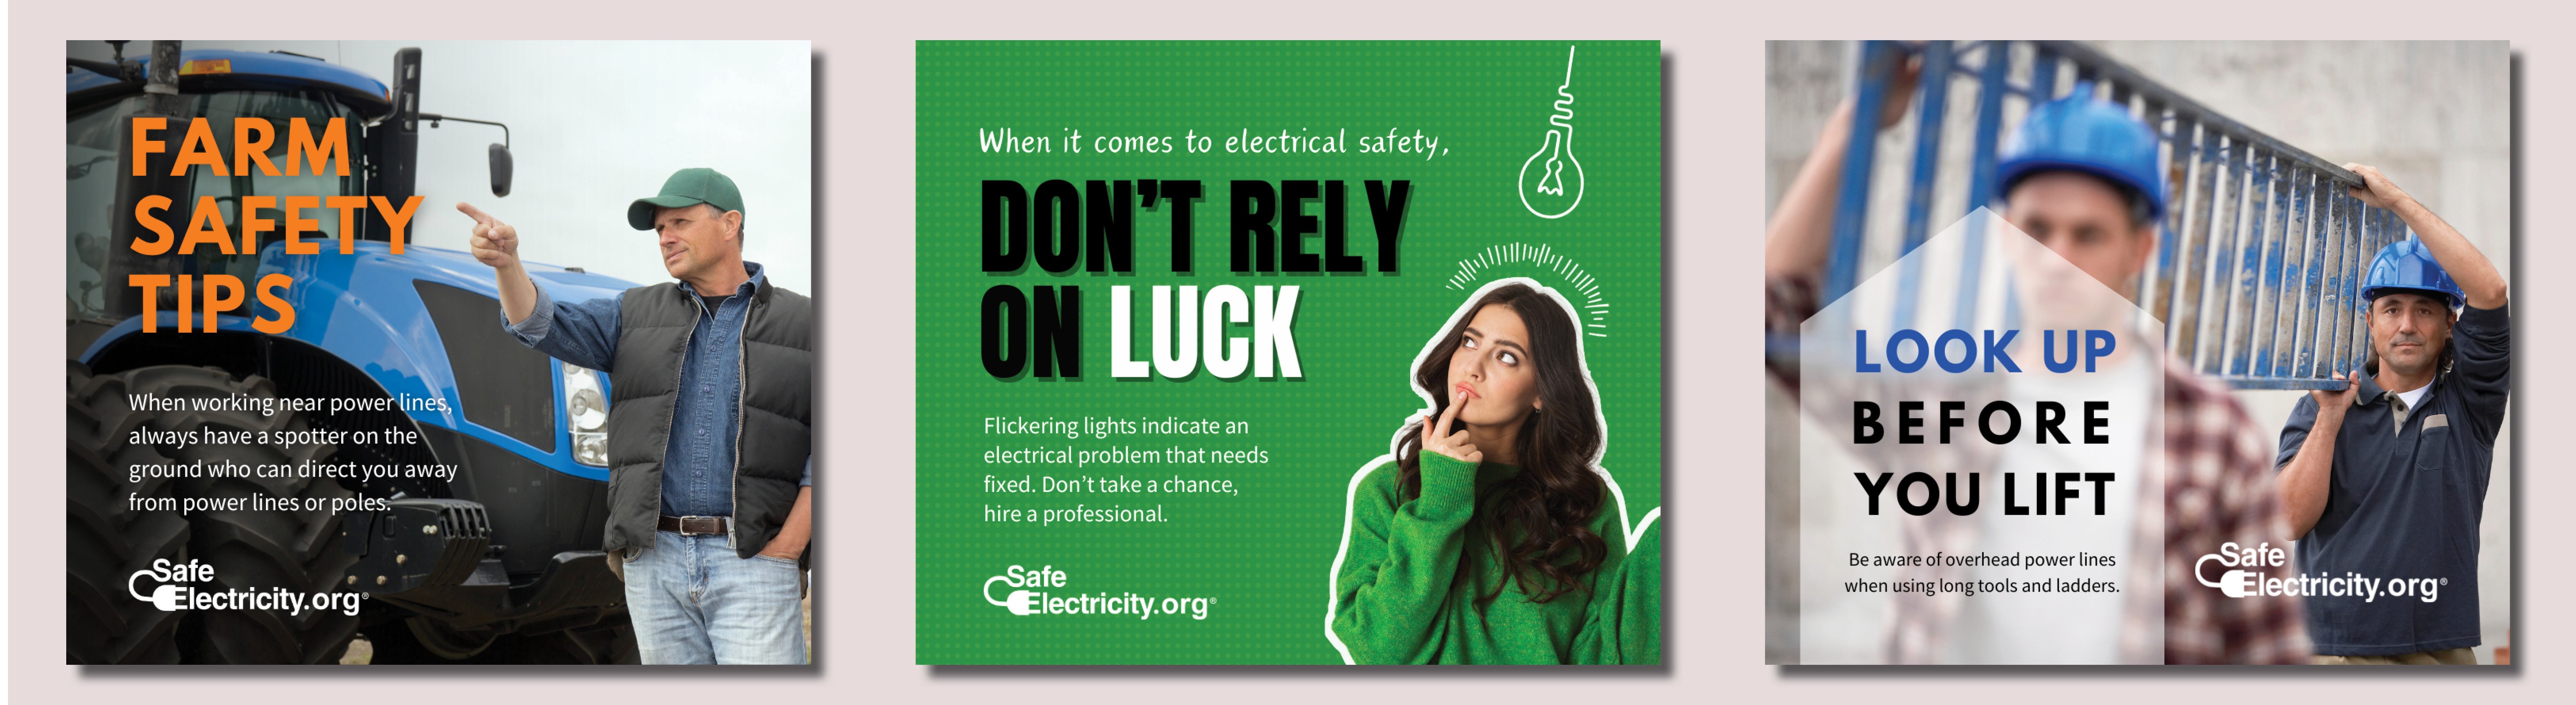 Use a spotter to watch for power lines; hire a professional if lights are flickering; be aware of overhead lines before lifting ladder and long tools